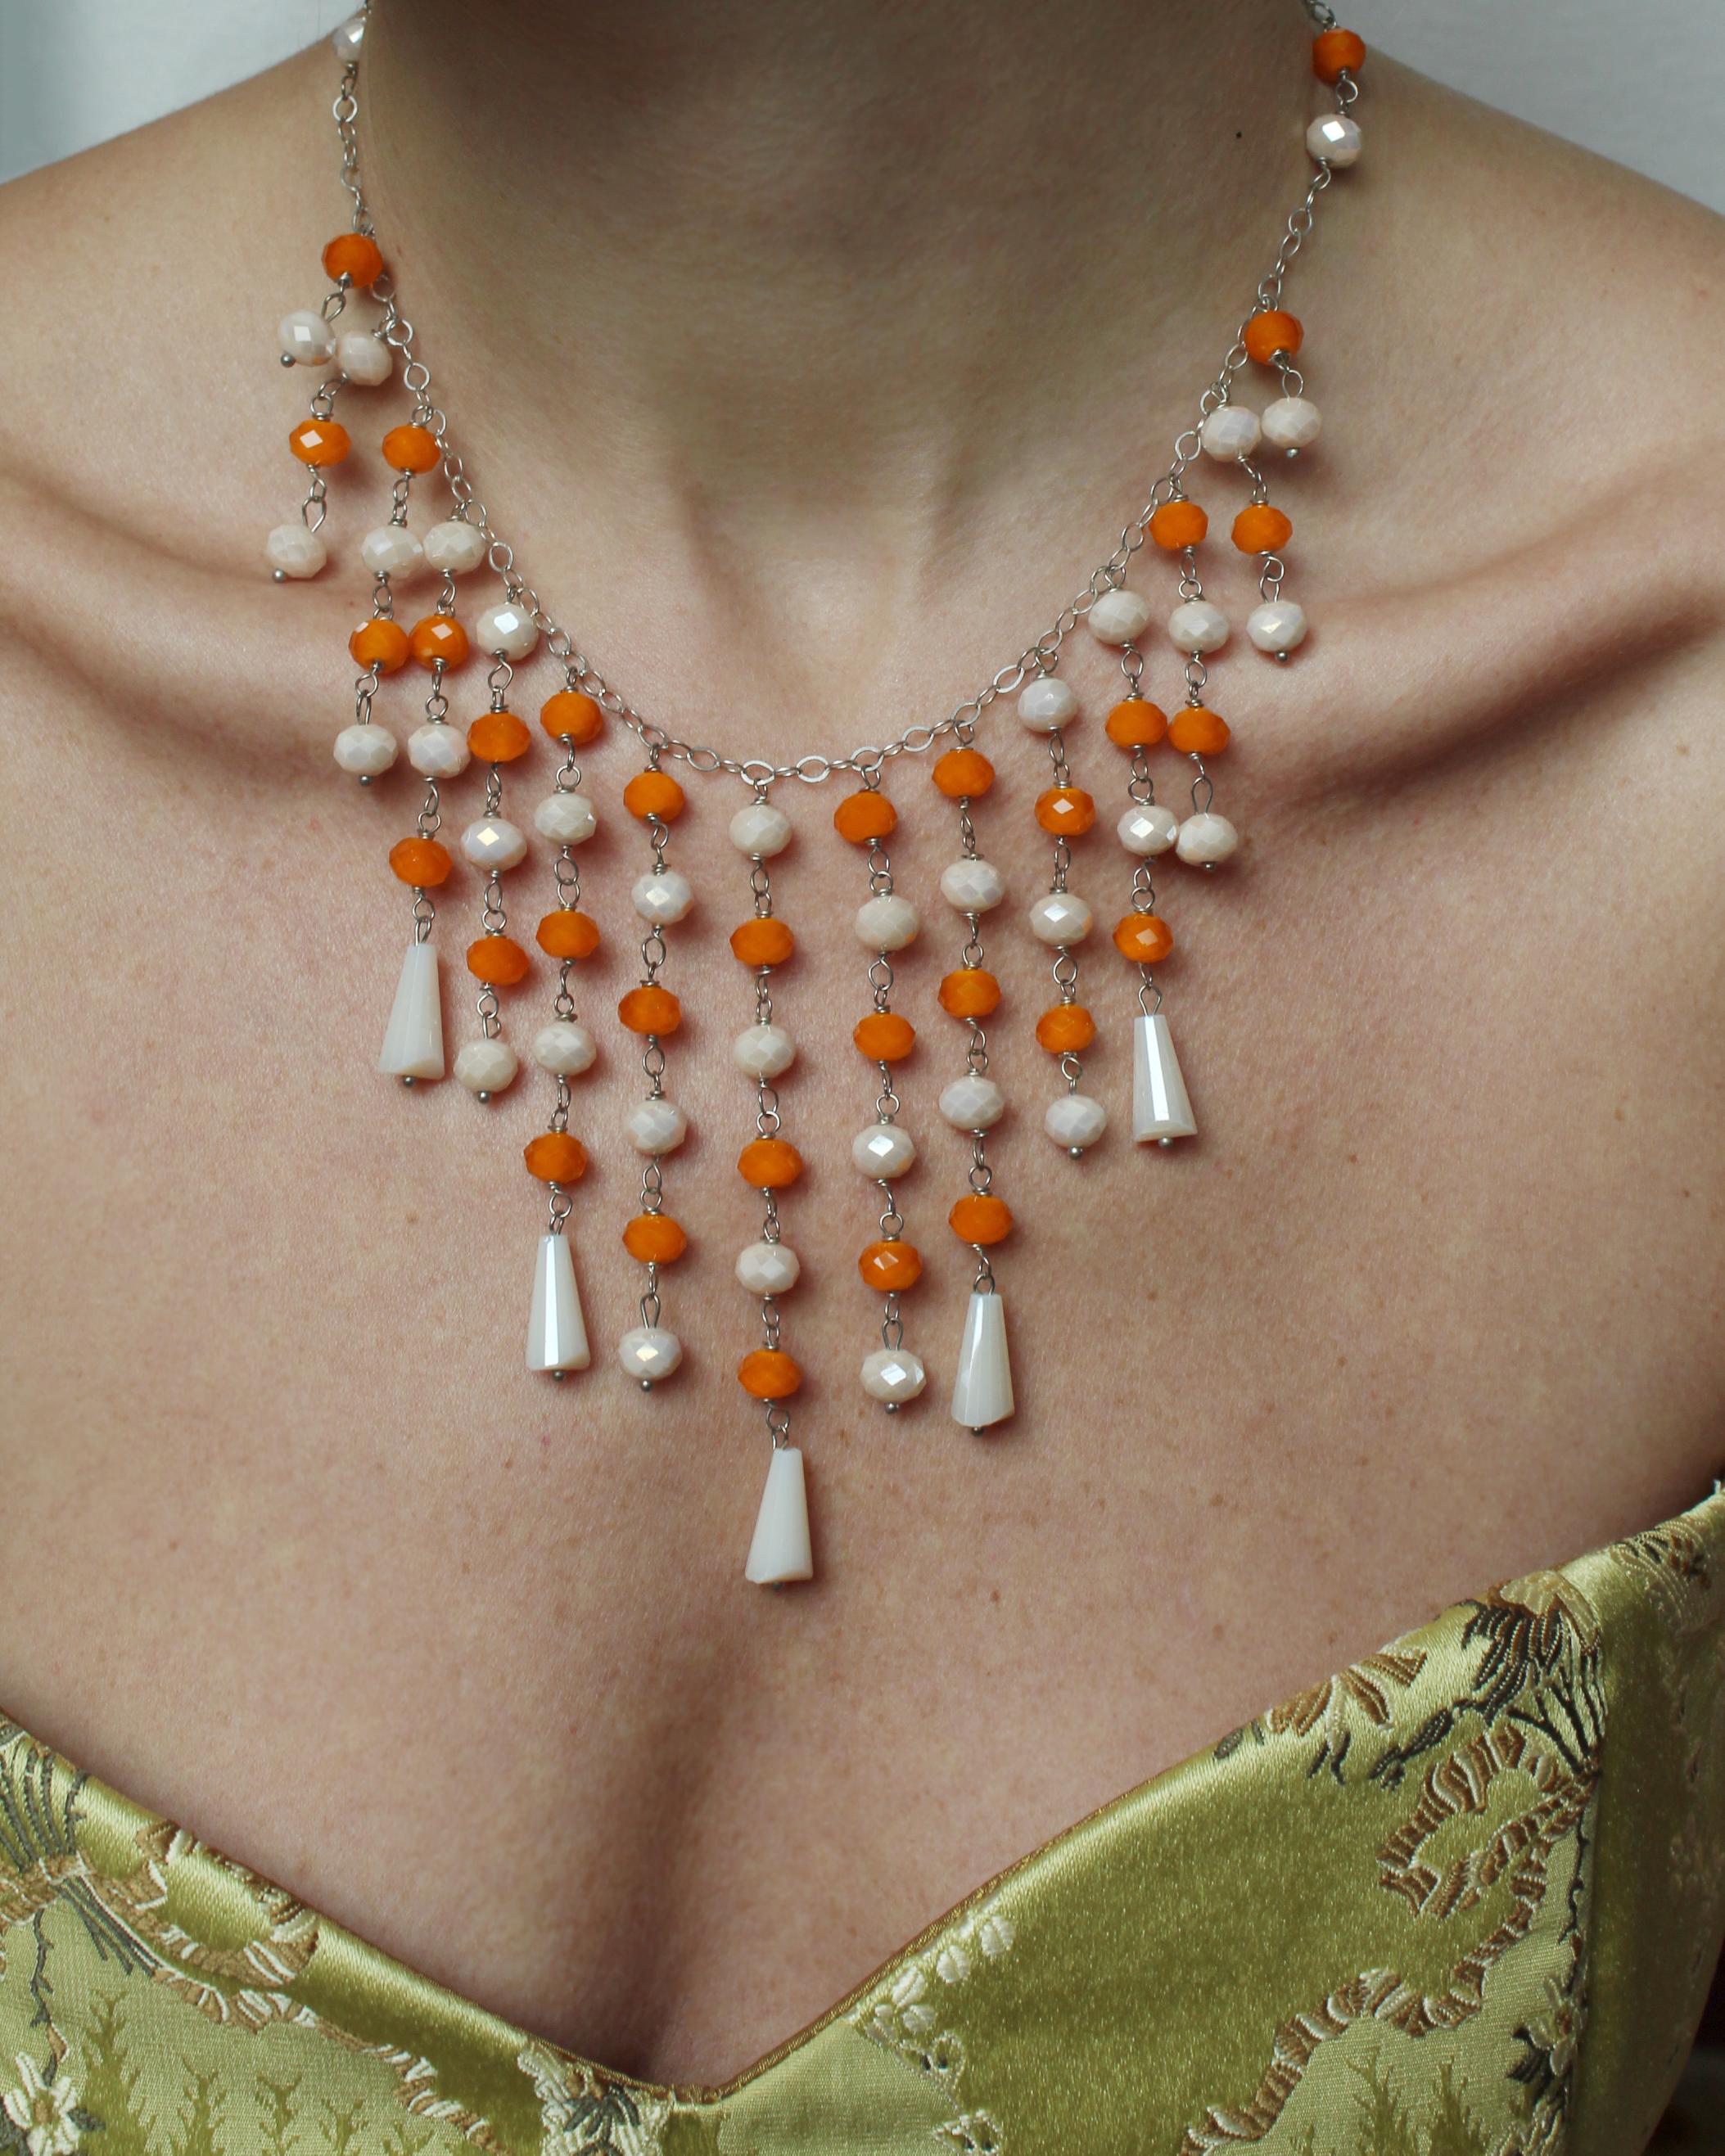 This gorgeous crystal waterfall necklace was crafted from fine Czech crystal in 1950s. The crystals are beautifully faceted, in orange and a milky ivory hue, on a silver chain— the color combination is so unique; I've never seen one quite like it